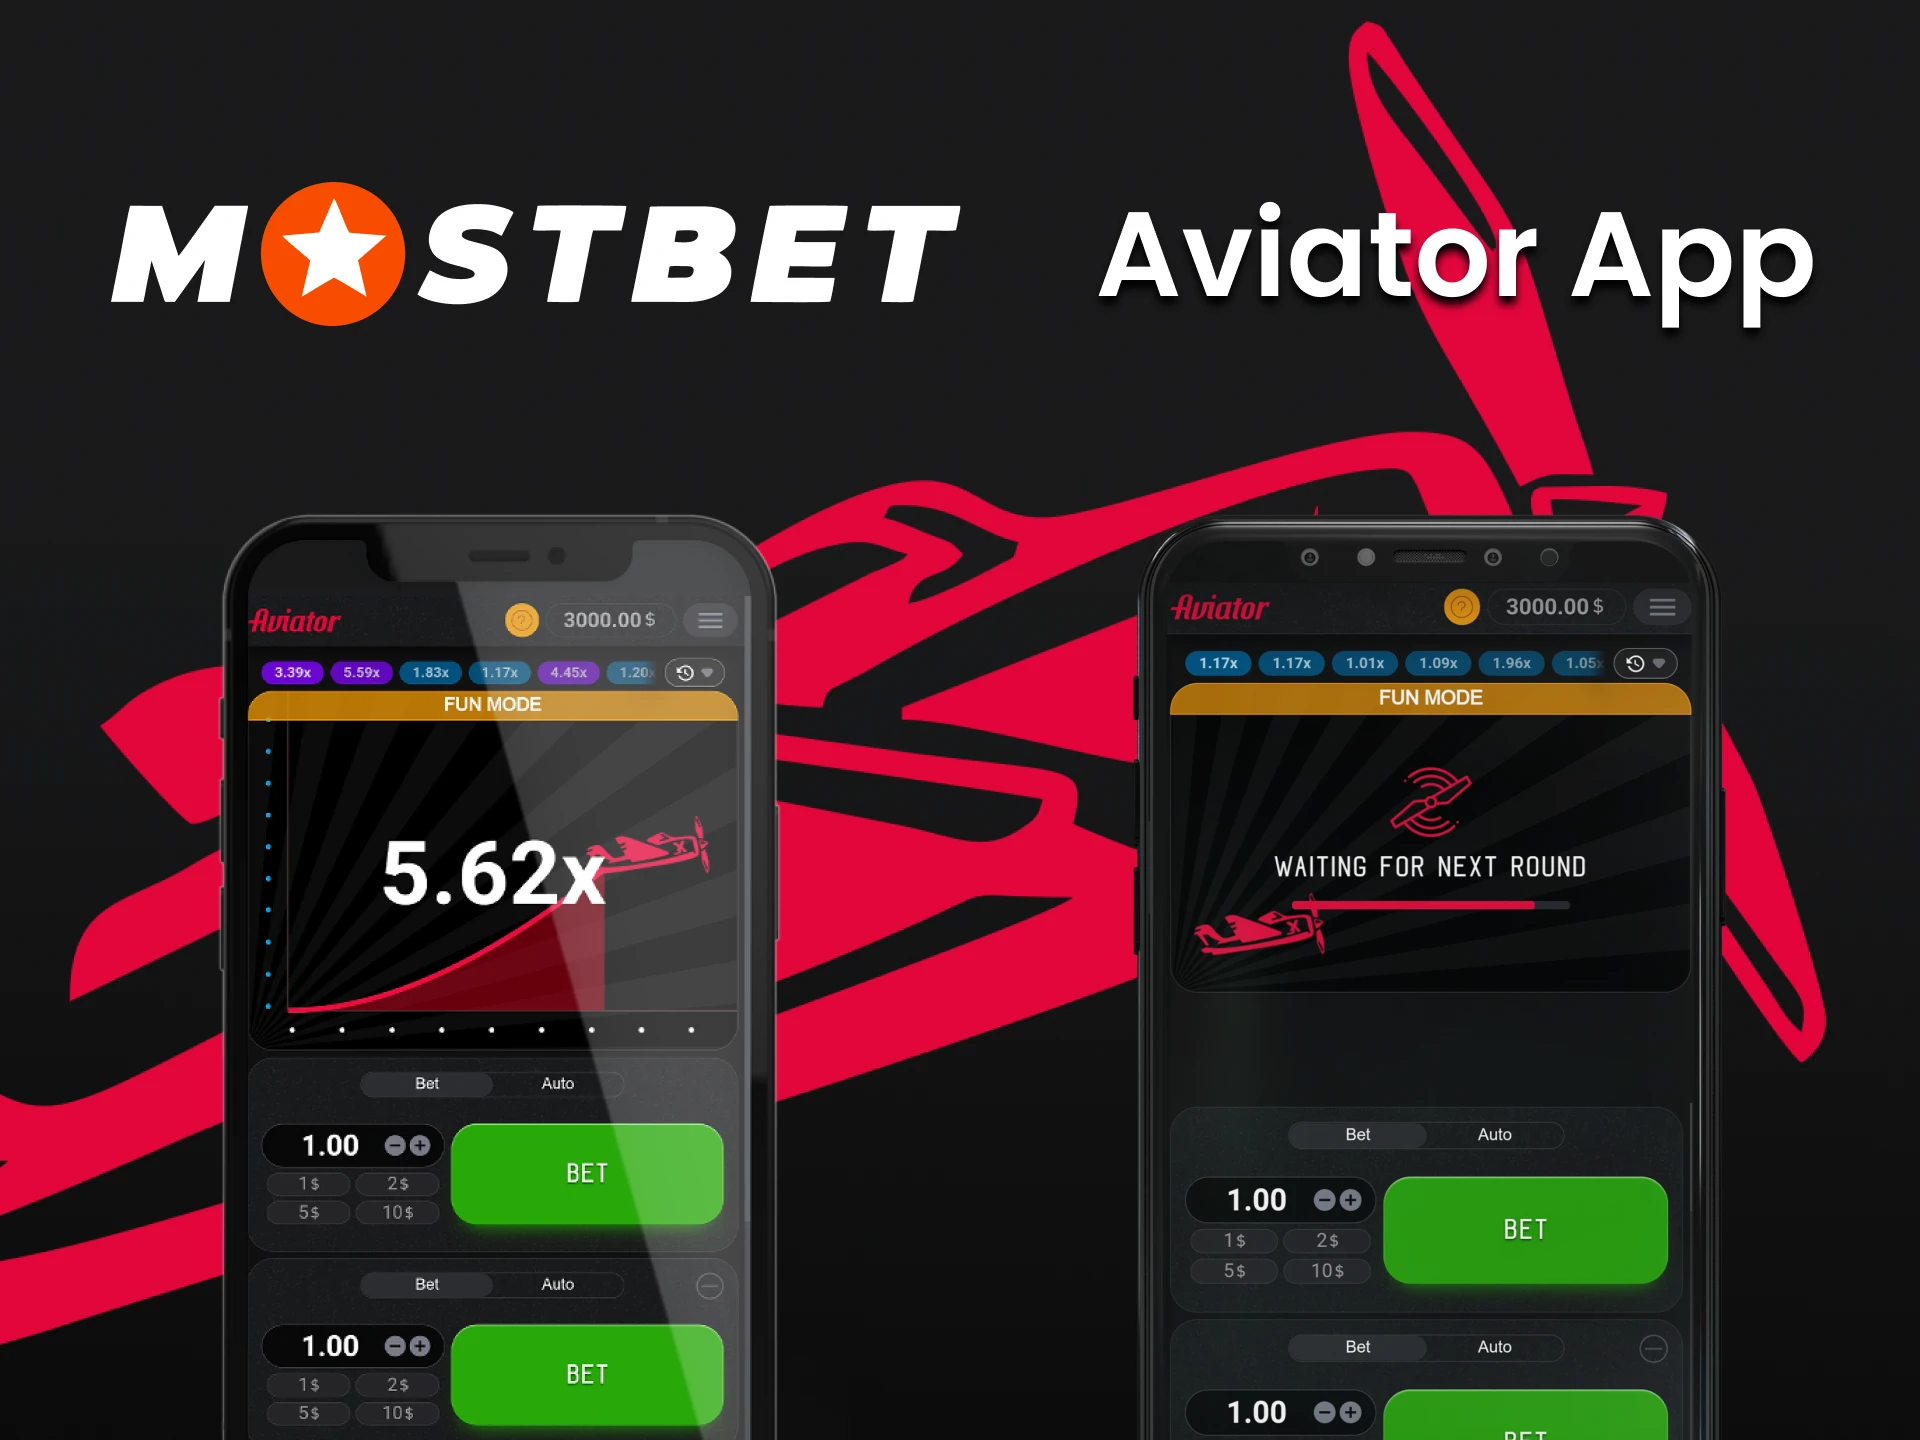 Using the Mostbet application on your phone, you can also play Aviator.